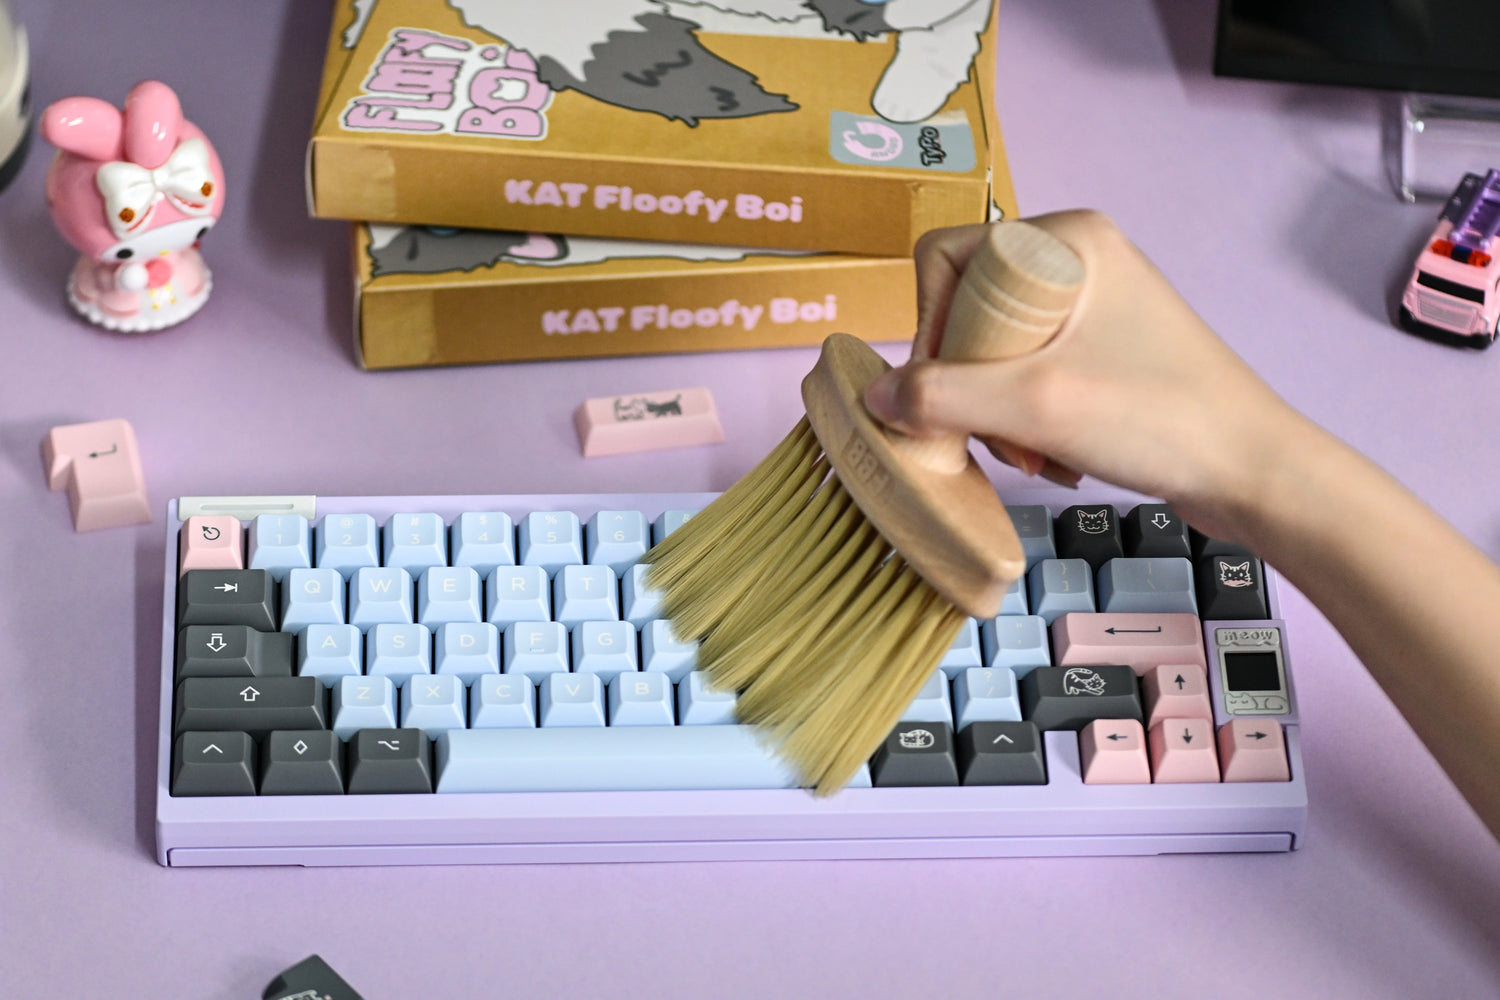 Keycaps 101: How to Clean and Maintain Like a Pro